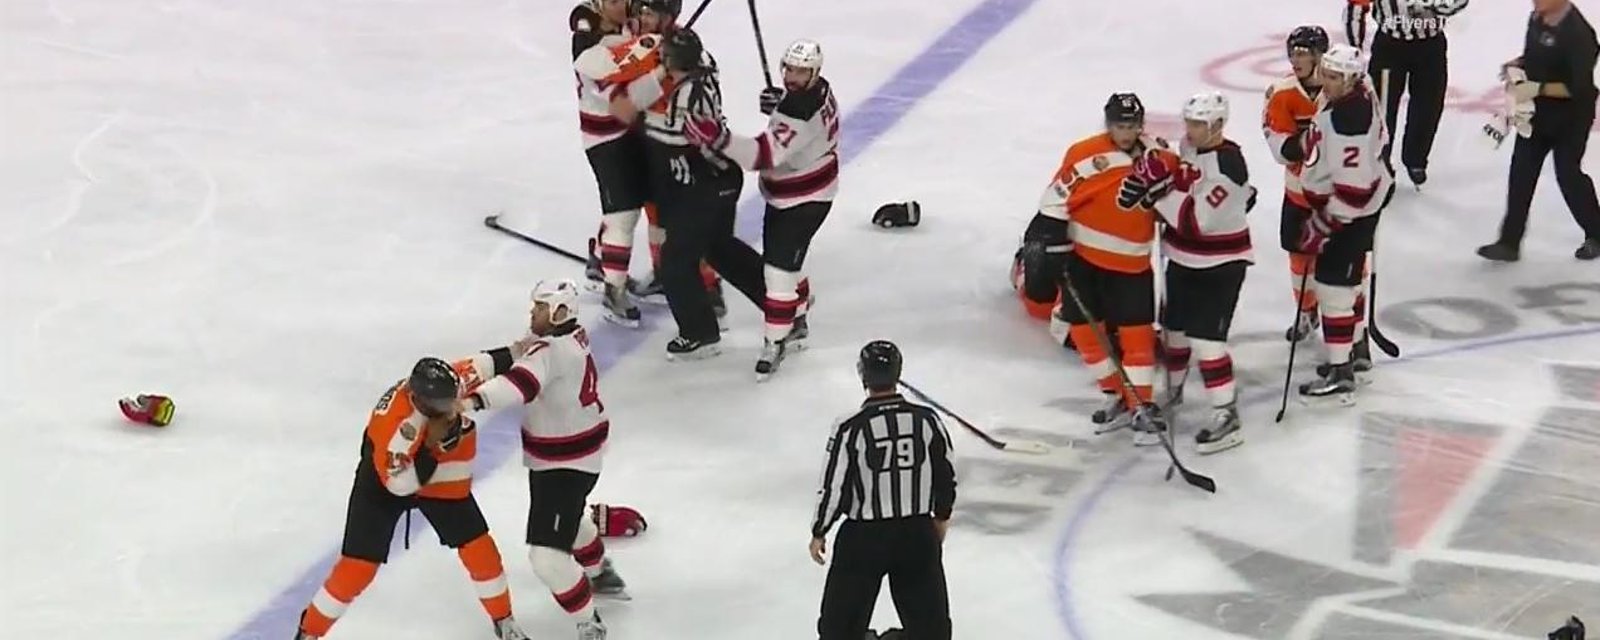 Intense sequence by Gudas, Simmonds after major hit. 